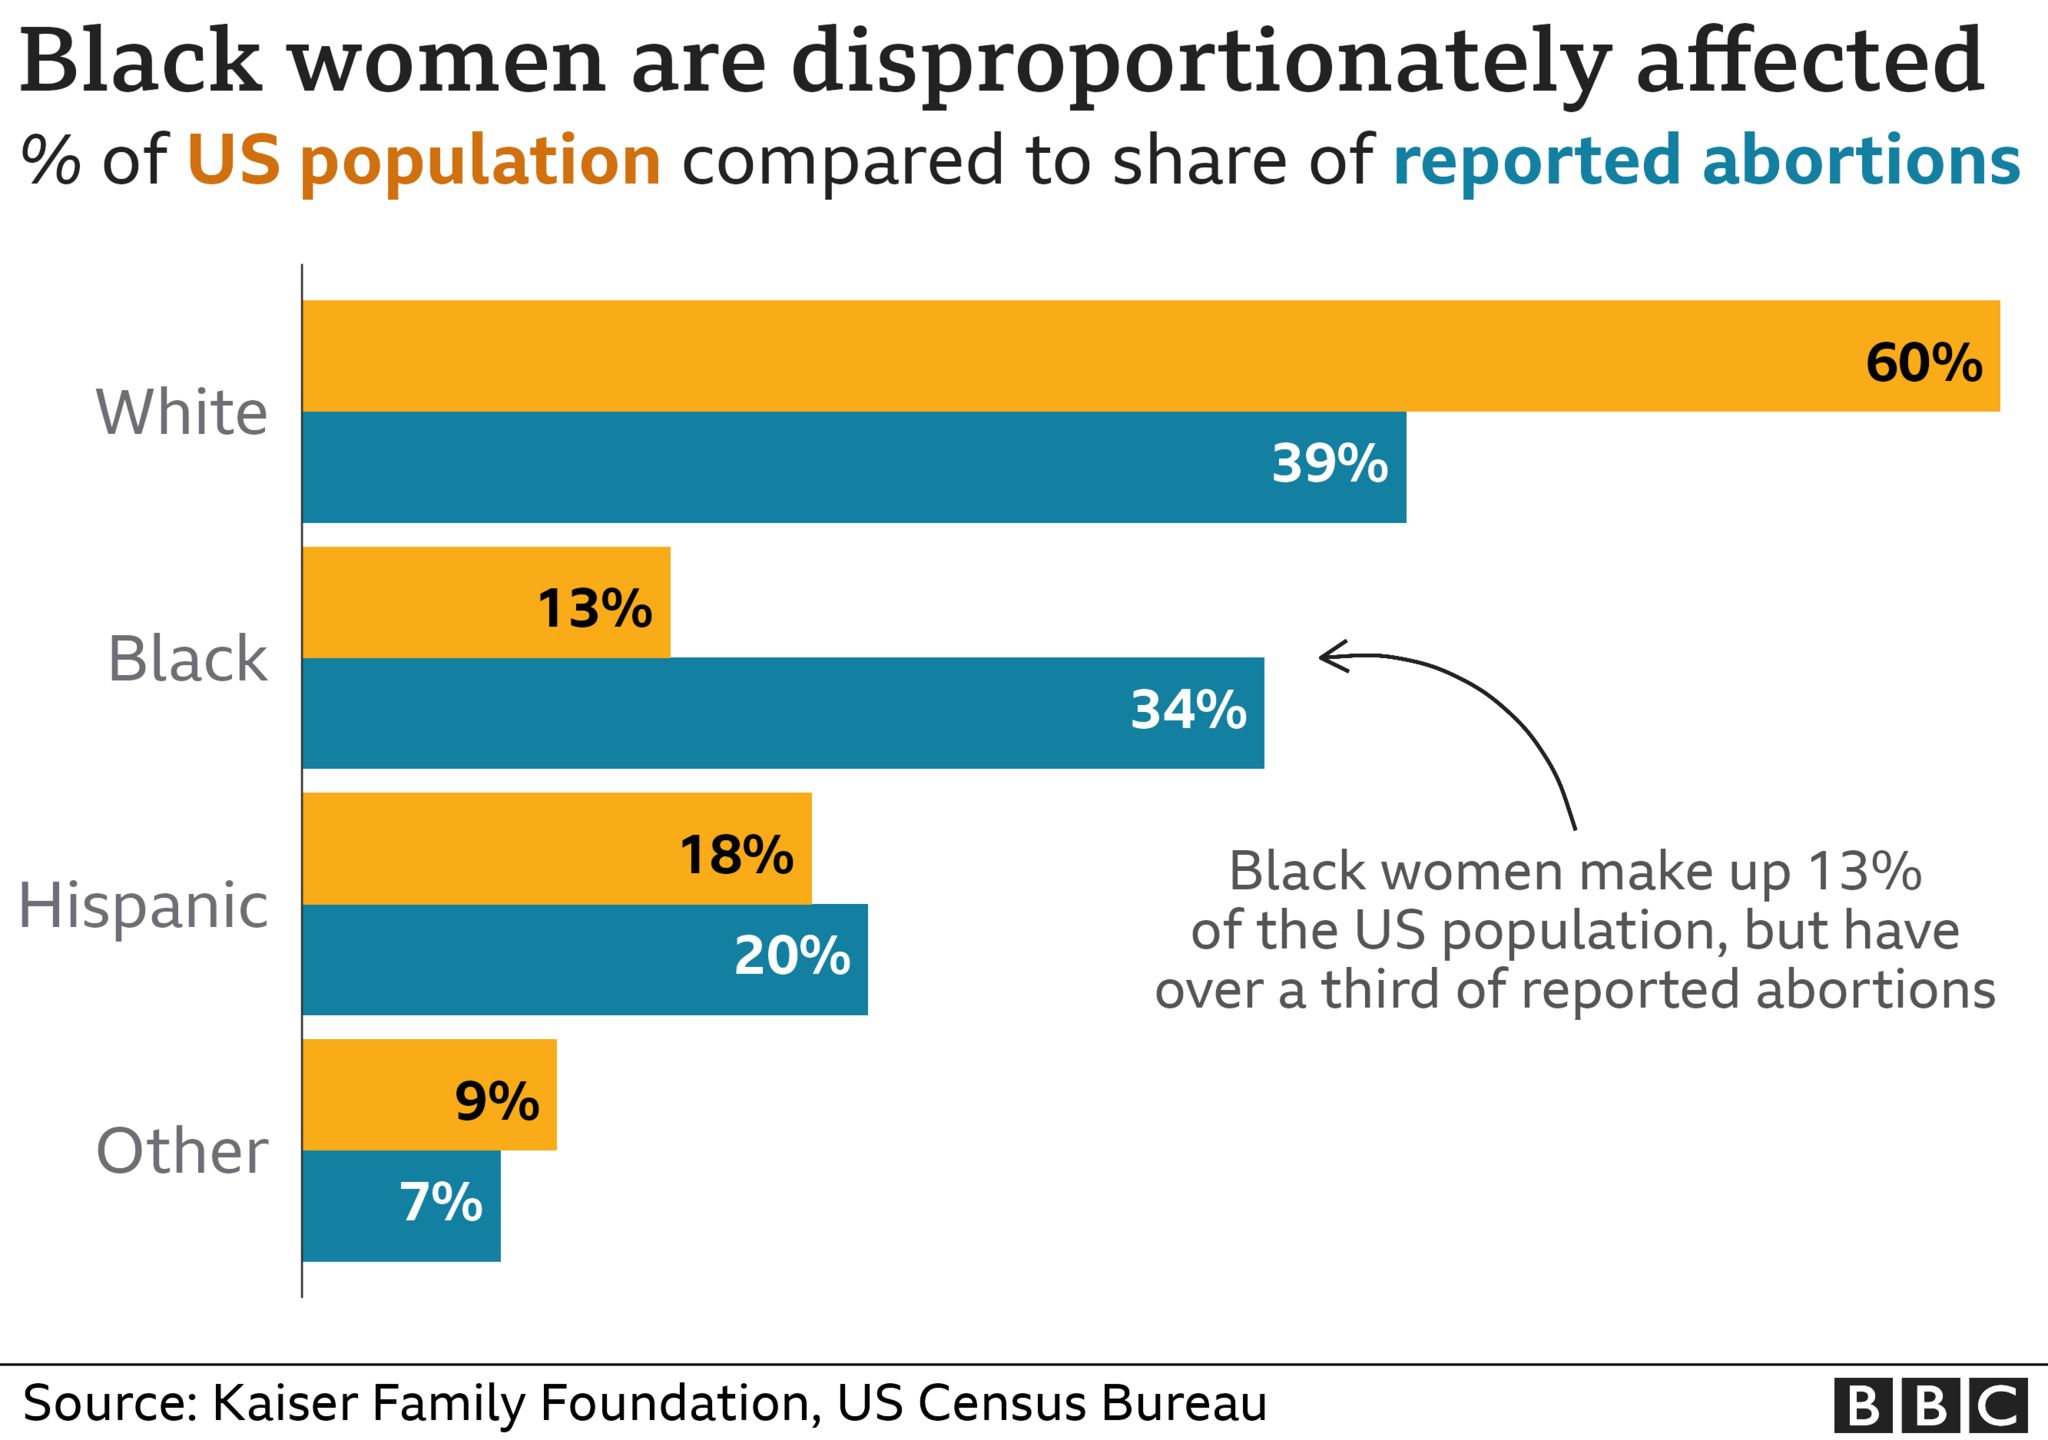 A bar graph showing the racial disparities in terms of reported abortions in the US